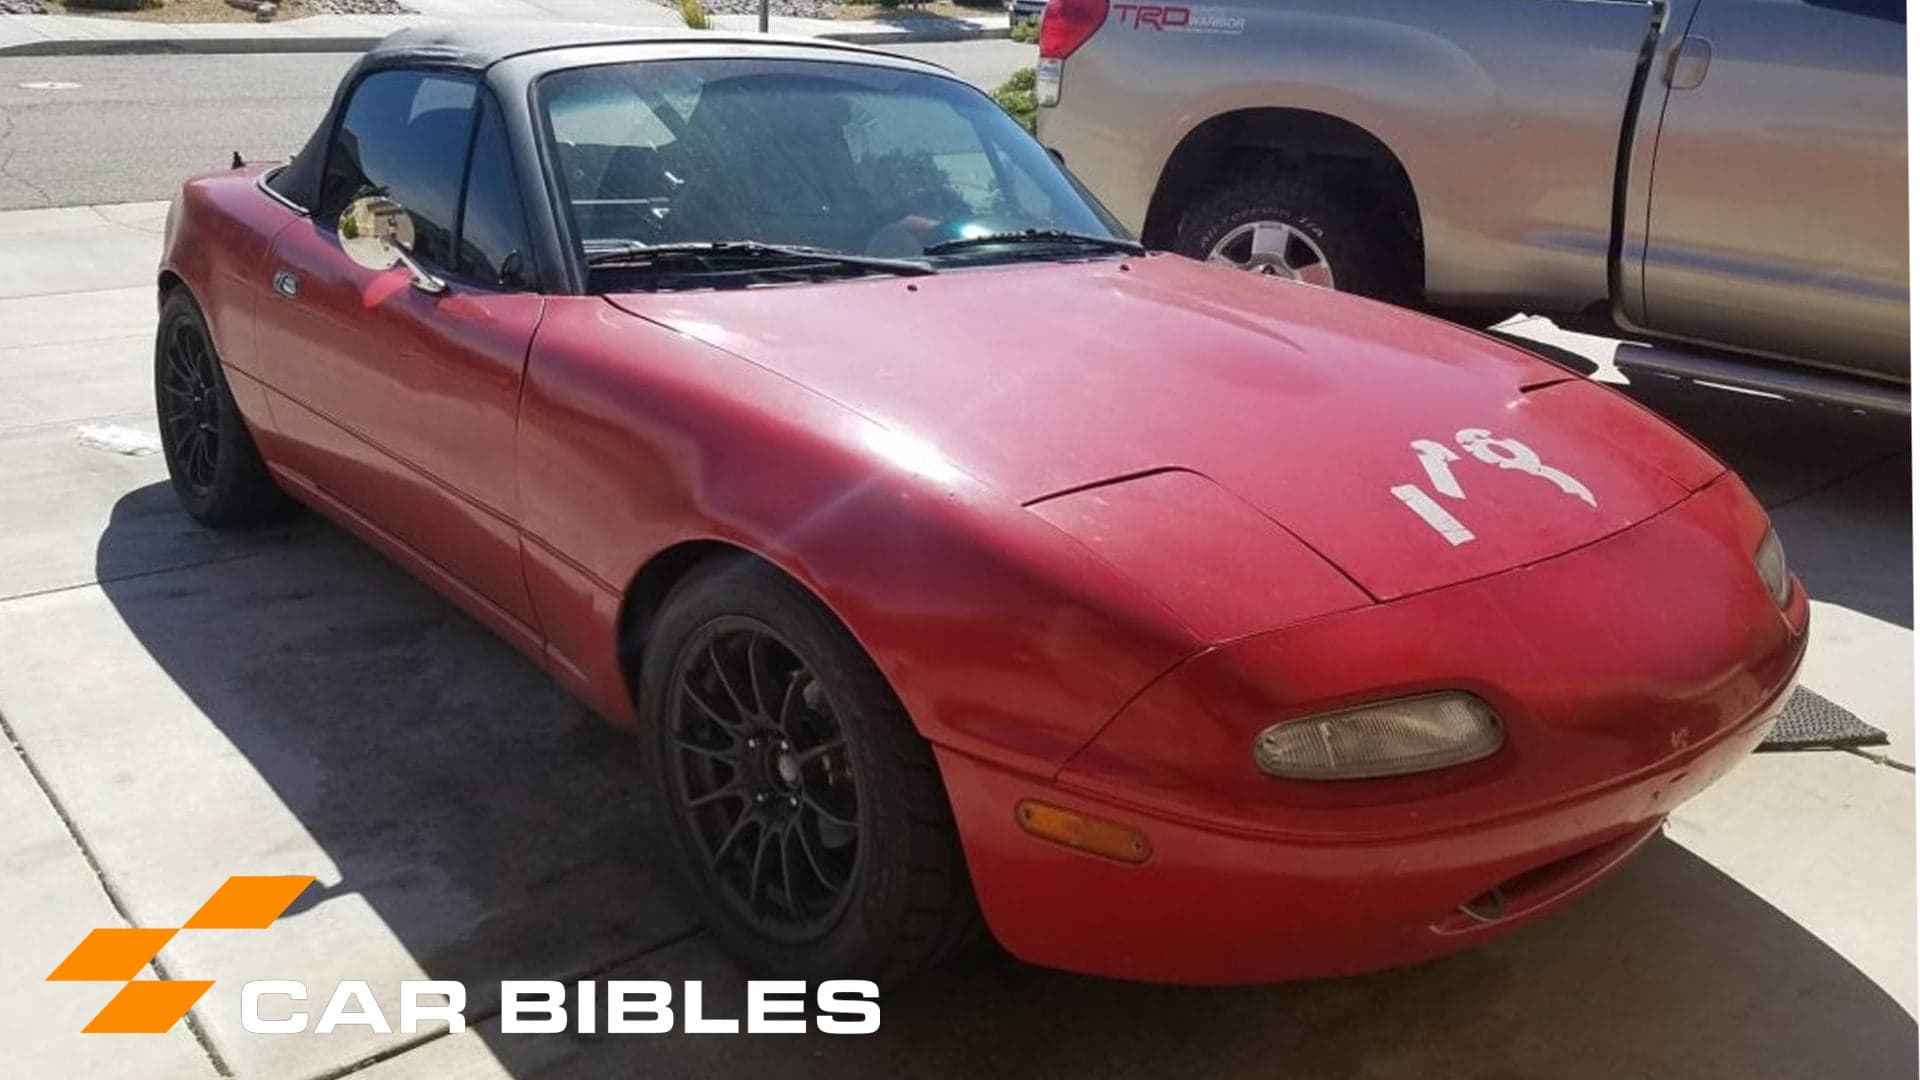 Trading My Lovely Lexus LS400 for a Garbage Miata Was a Hard Lesson in Car Buying